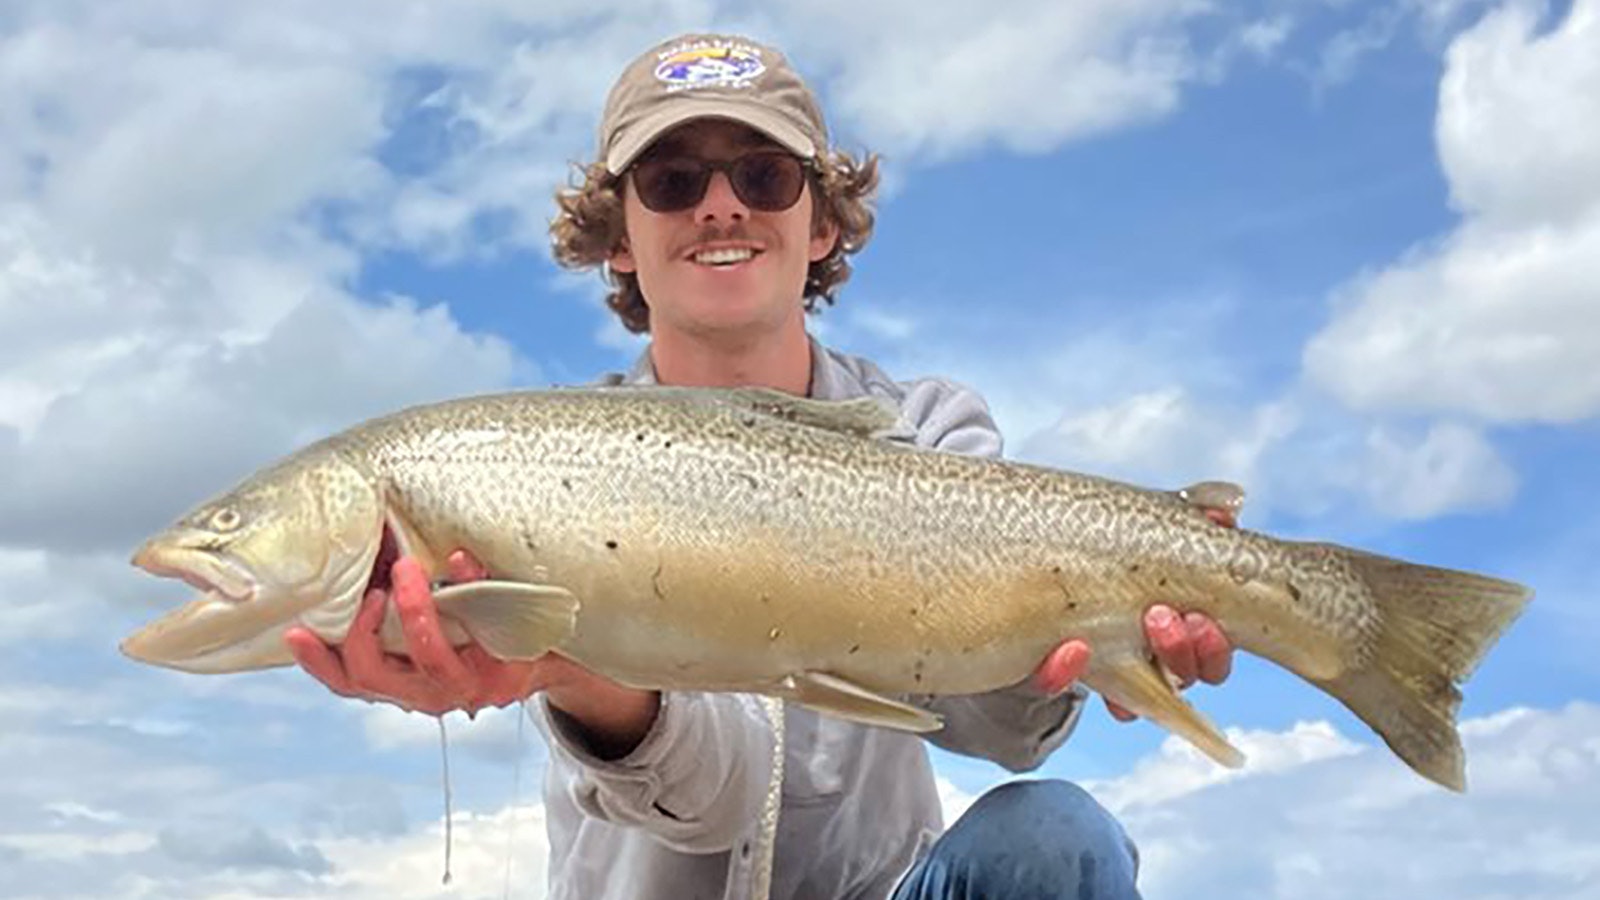 Owen Schaad of Cheyenne caught this state record tiger trout recently from Viva Naughton Reservoir.